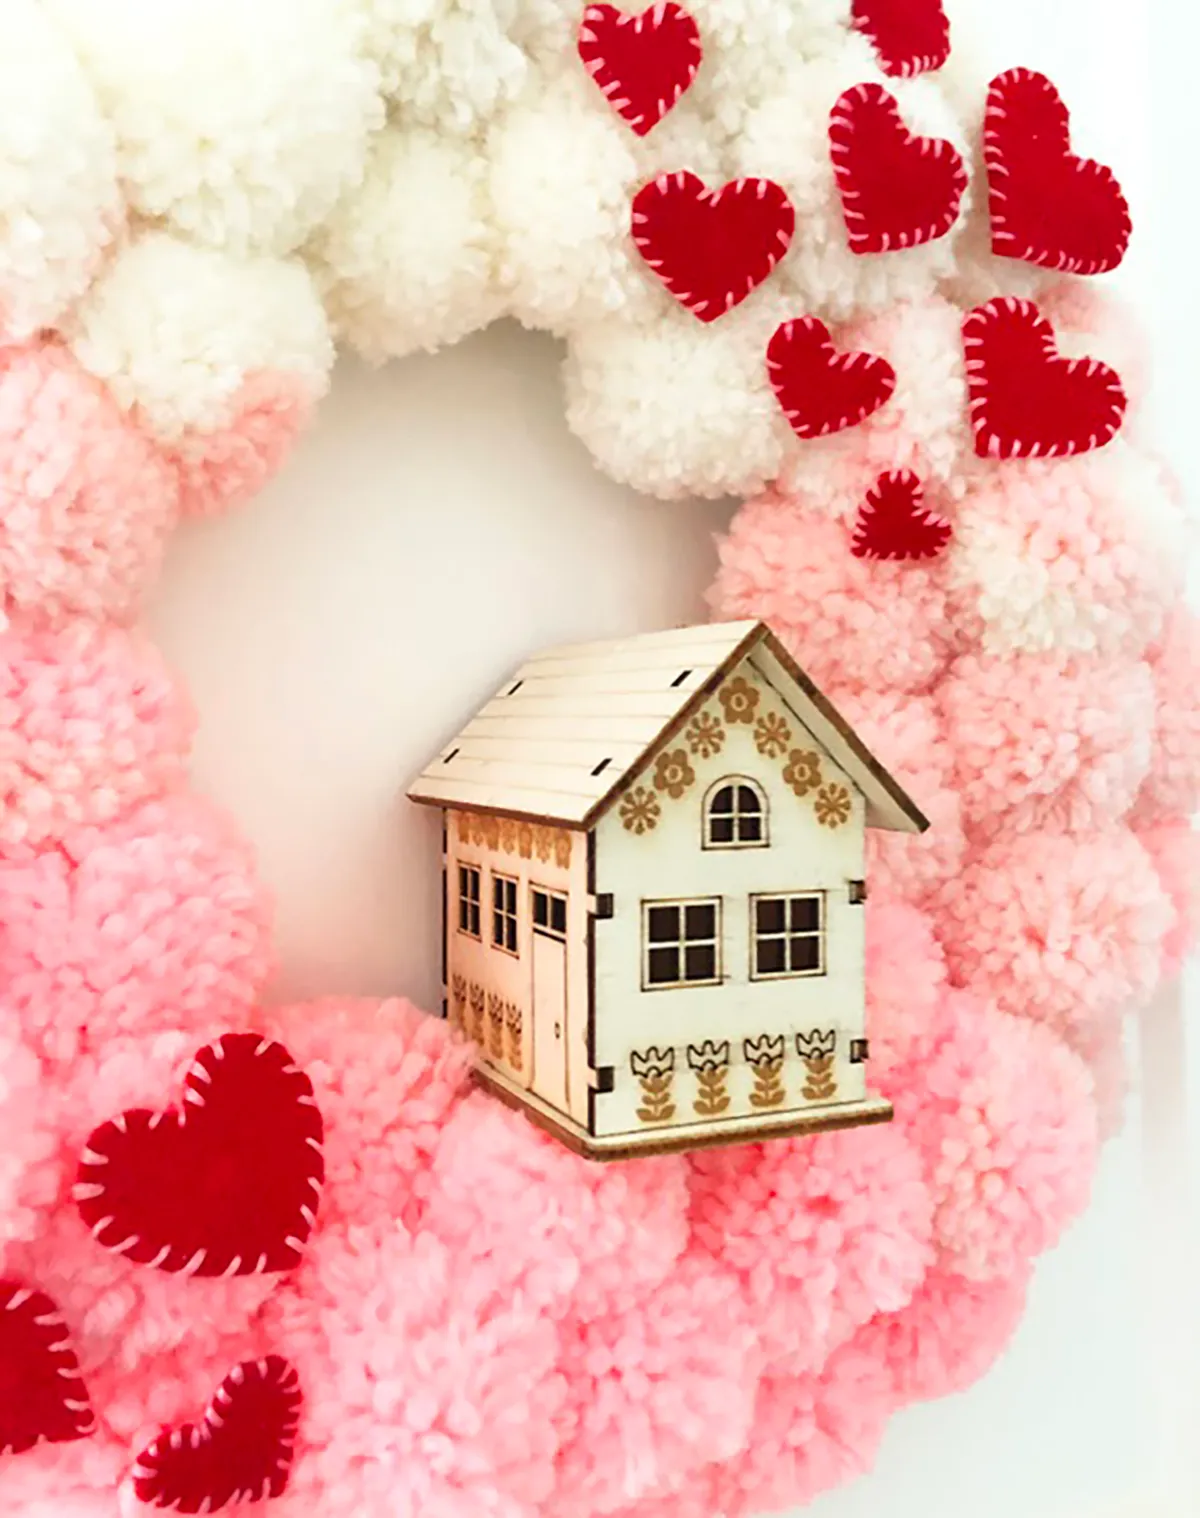 diy valentines decorations - wreath made of pom poms with a small wooden house